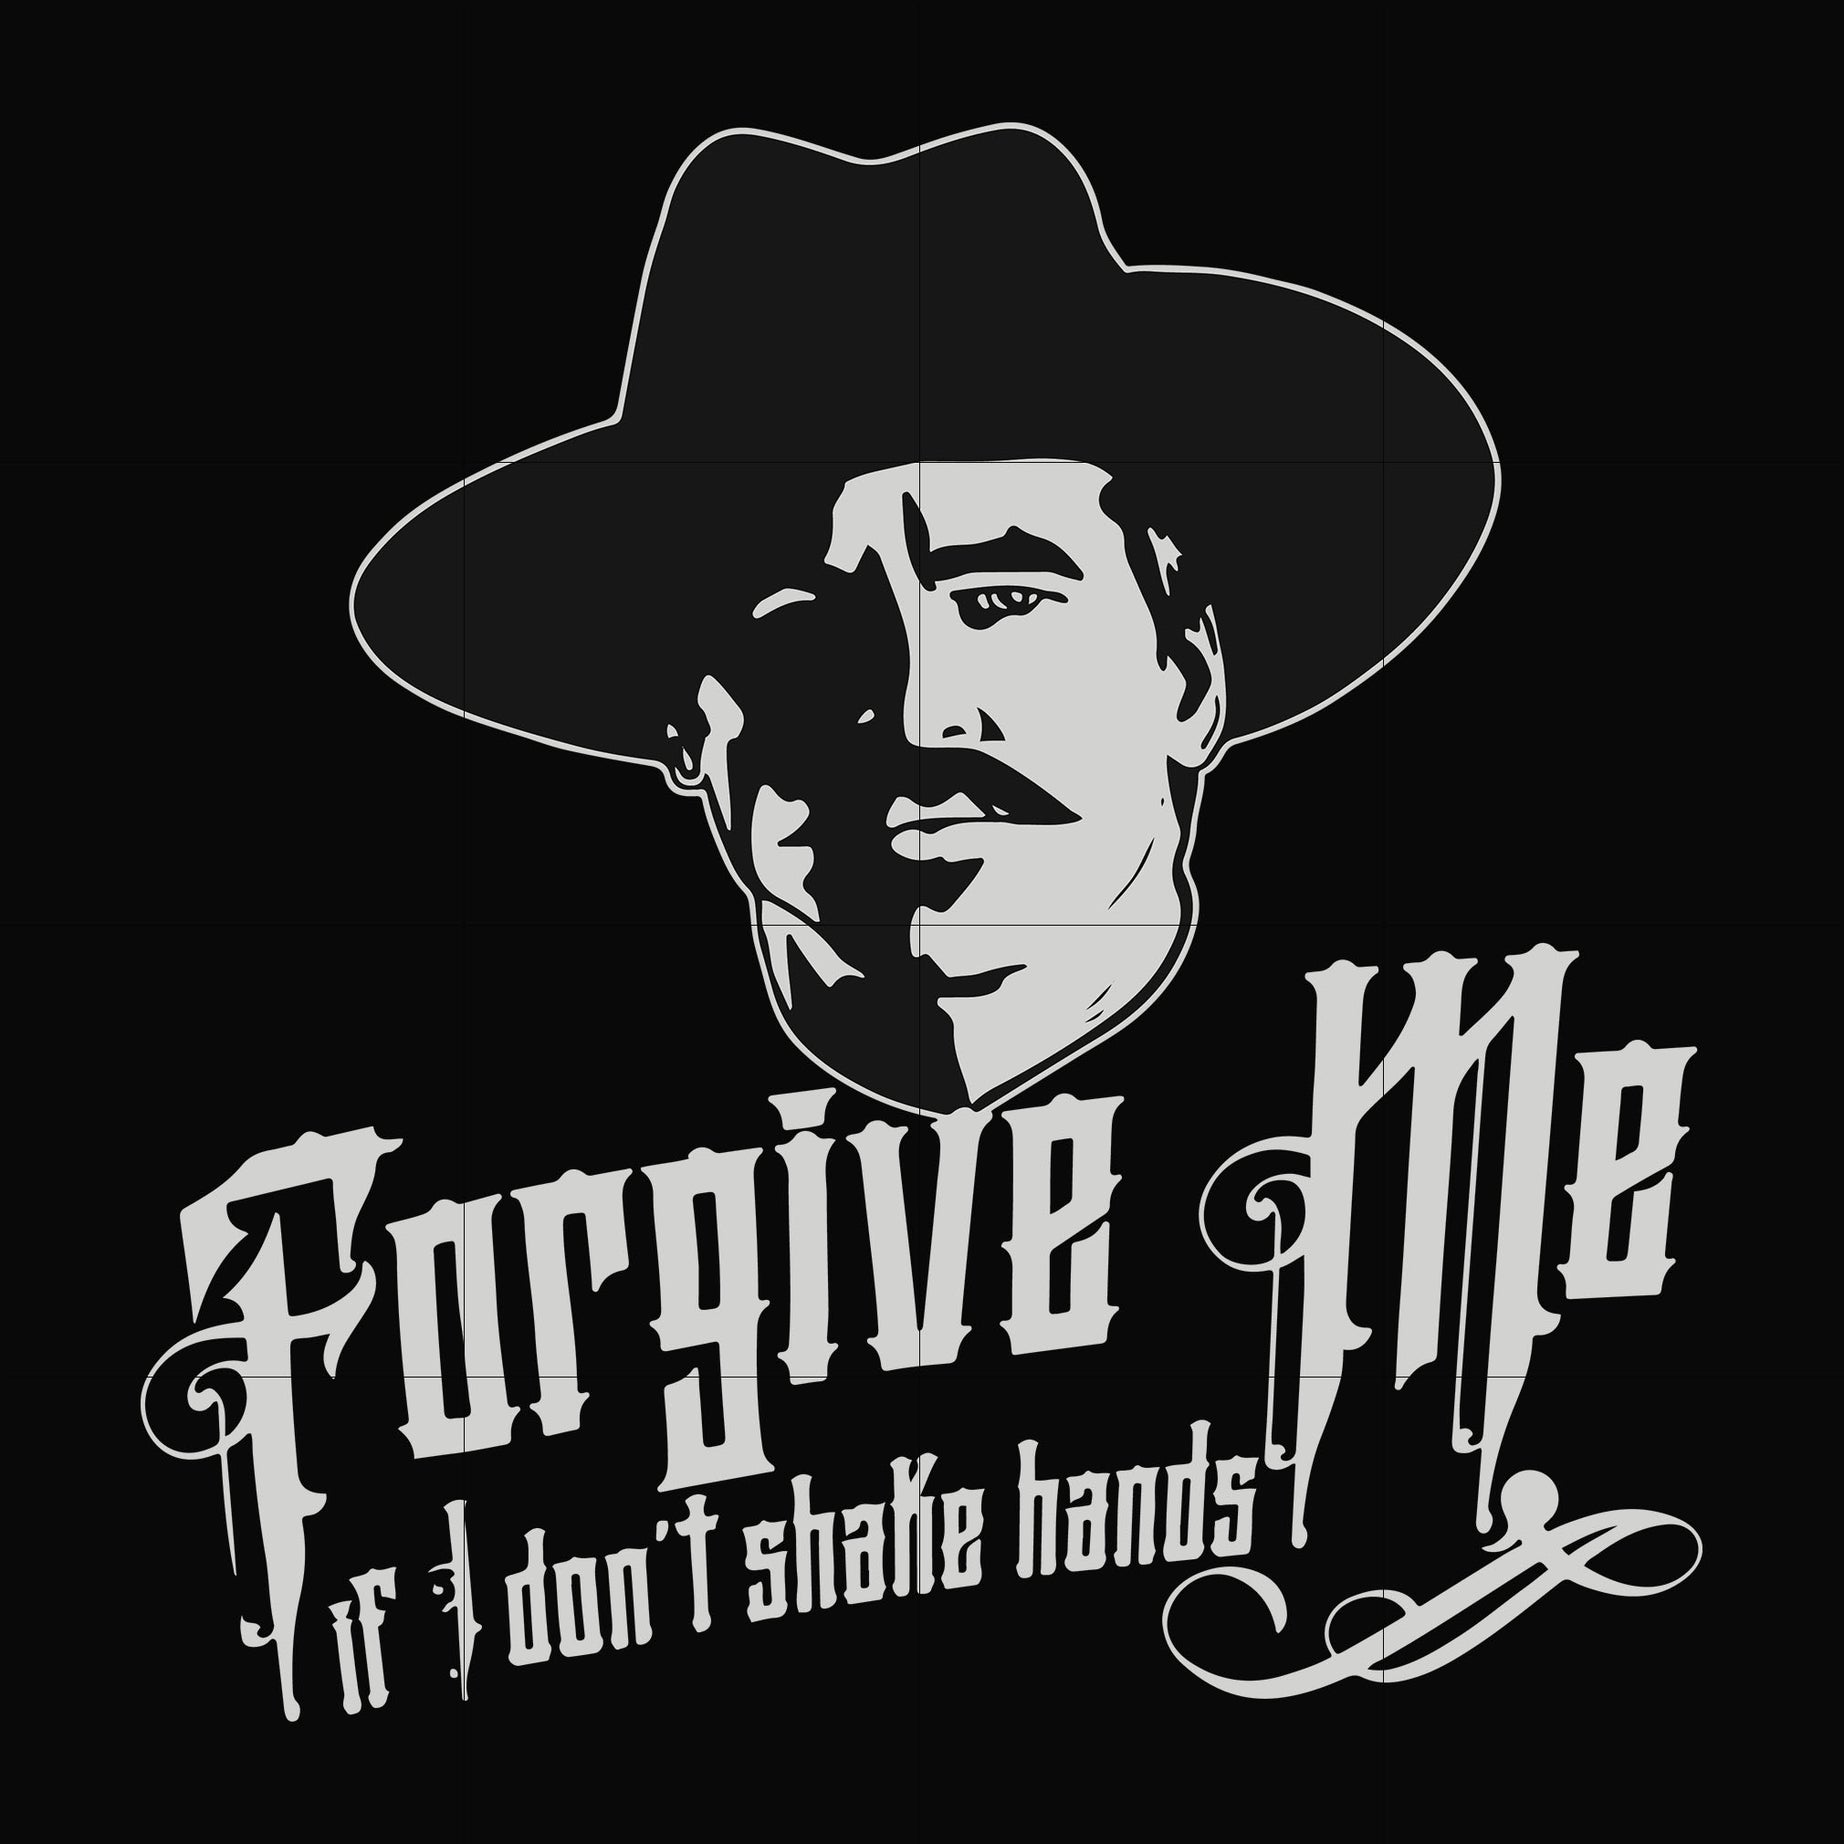 Forgive me if I don't shake hands svg, png, dxf, eps file FN0001022